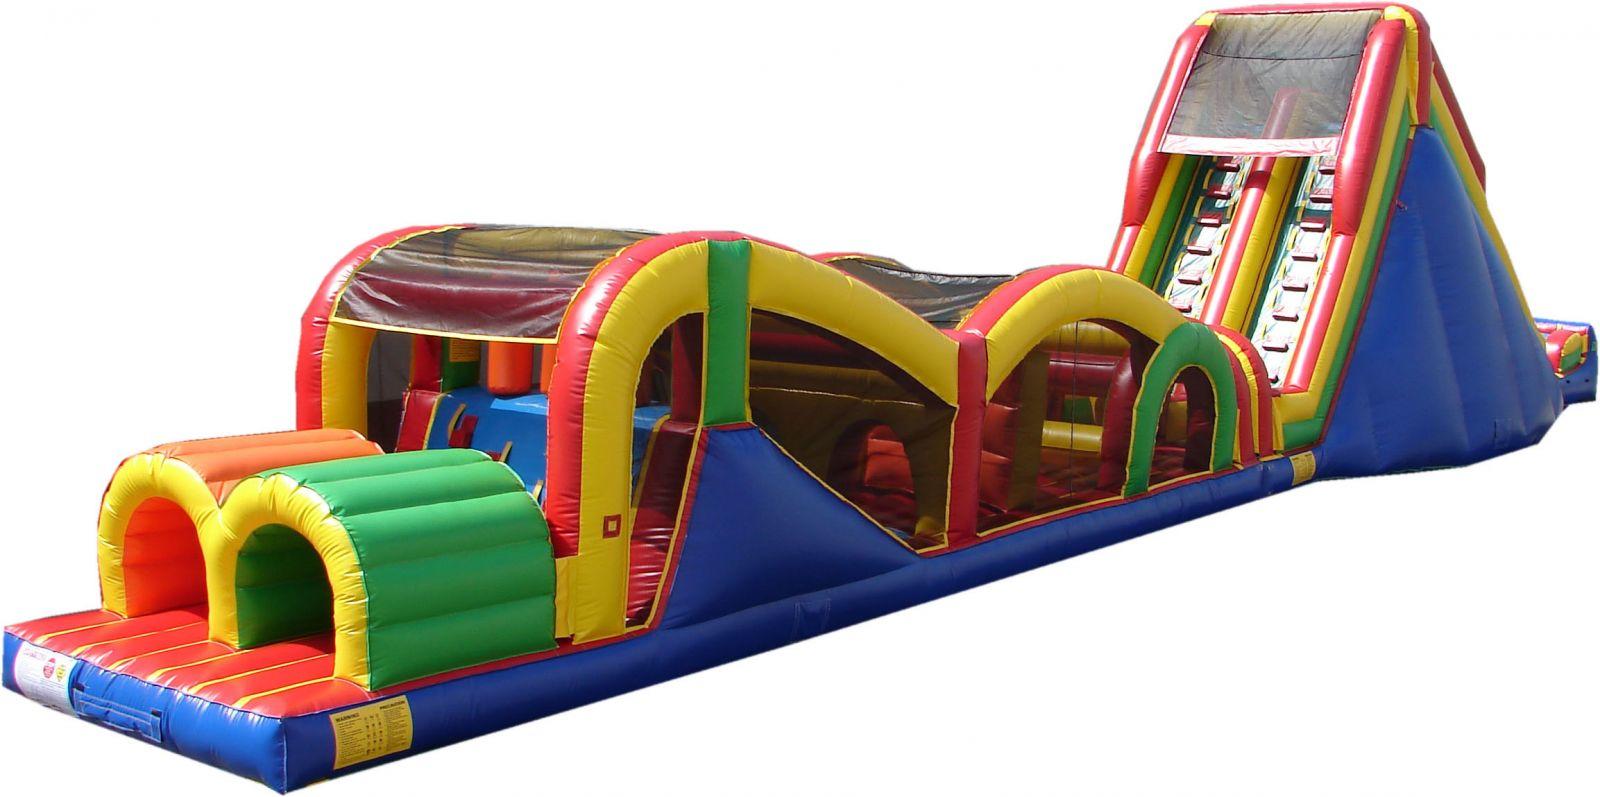 Inflatable Obstacle Course Rental in Oak Park